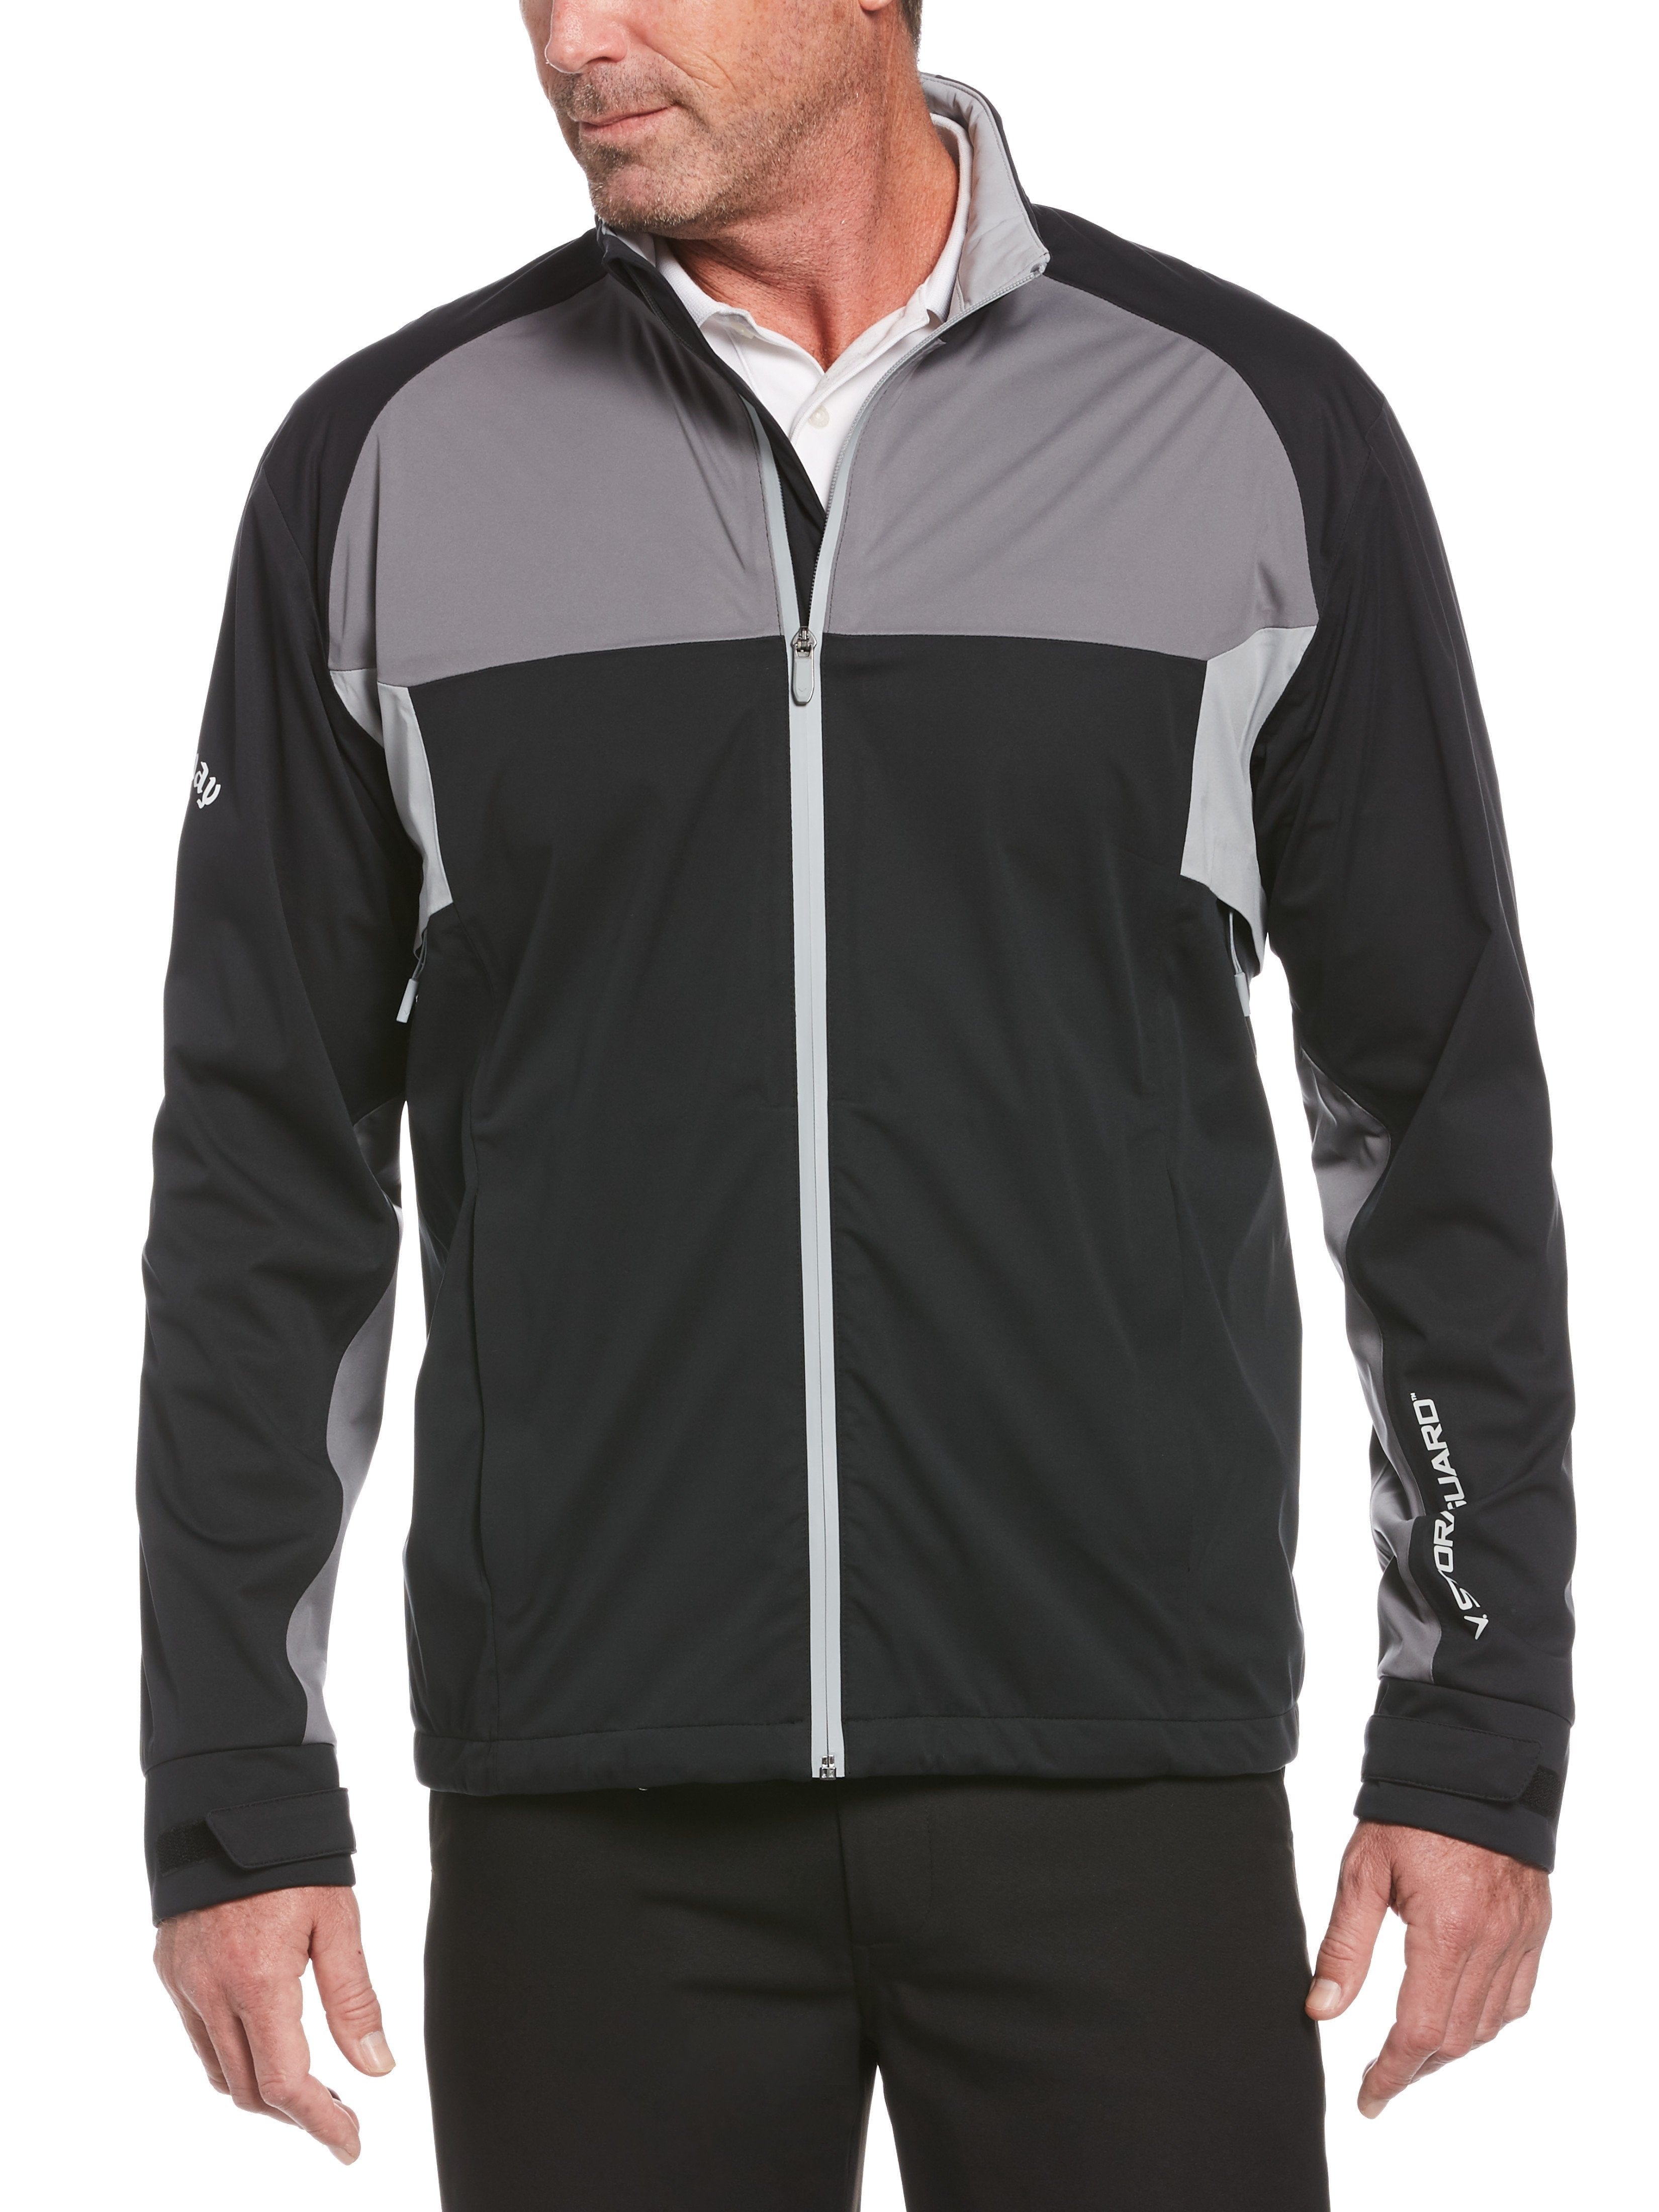 Callaway Apparel Mens Swing Tech™ StormGuard™ Water-Resistant Golf Jacket Top, Size Large, Black, Recycled Polyester/Polyester | Golf Apparel Shop